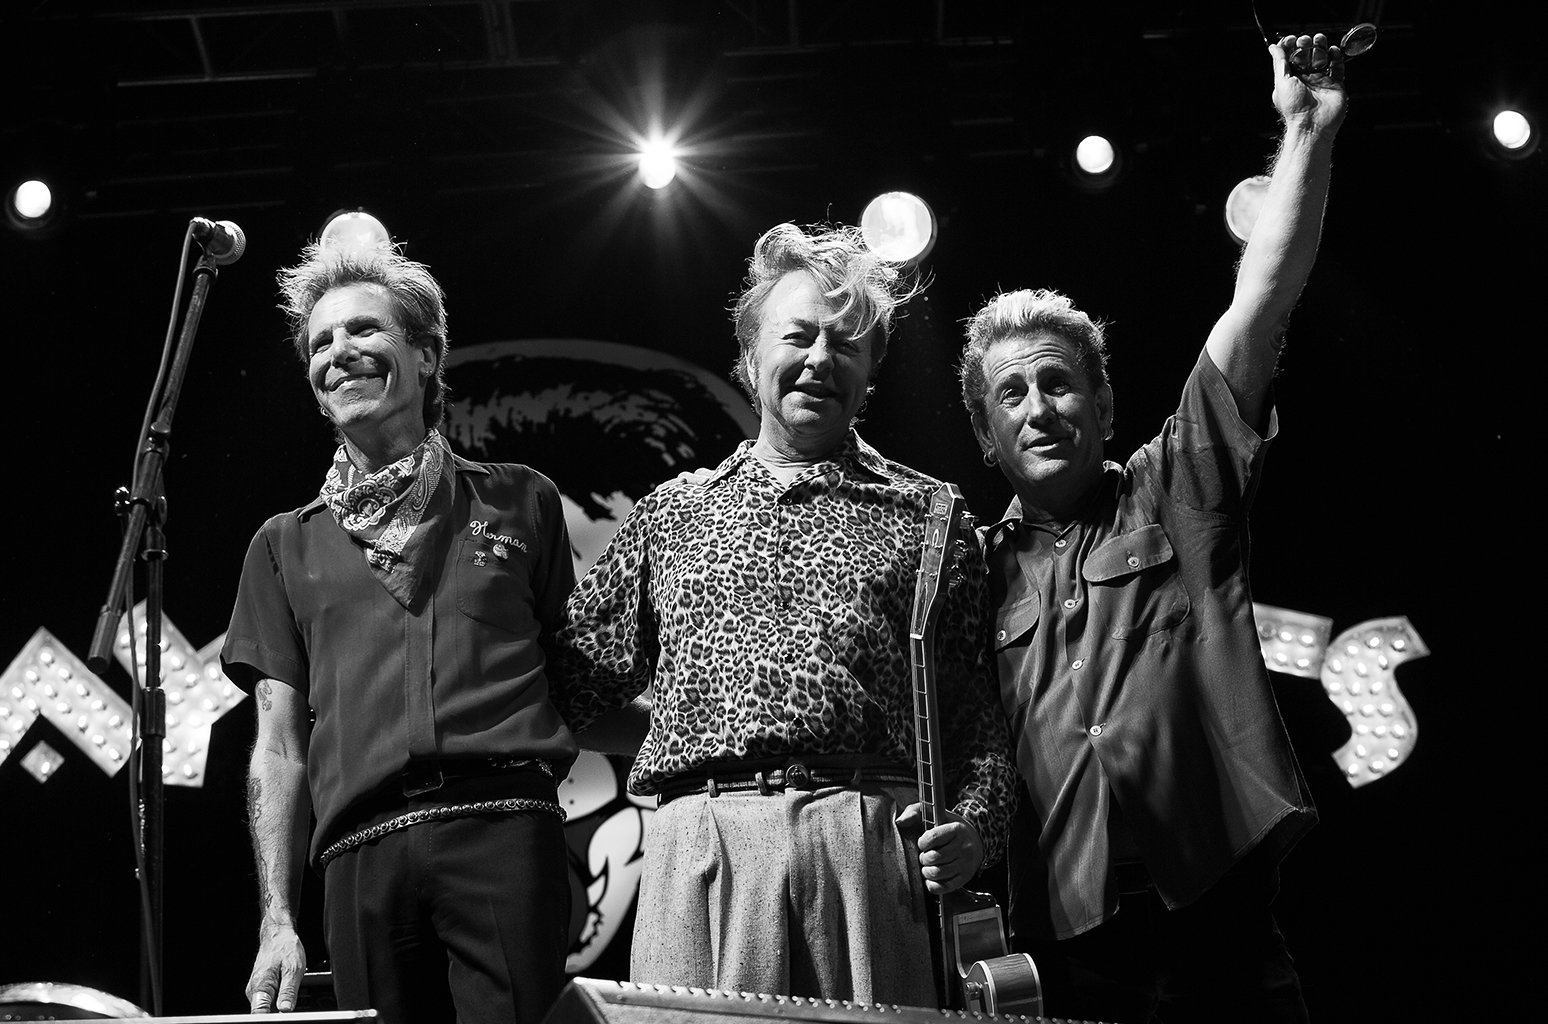 billboard on Twitter: "Stray Cats will record first album in 25 years  https://t.co/18r0rNrSms… "